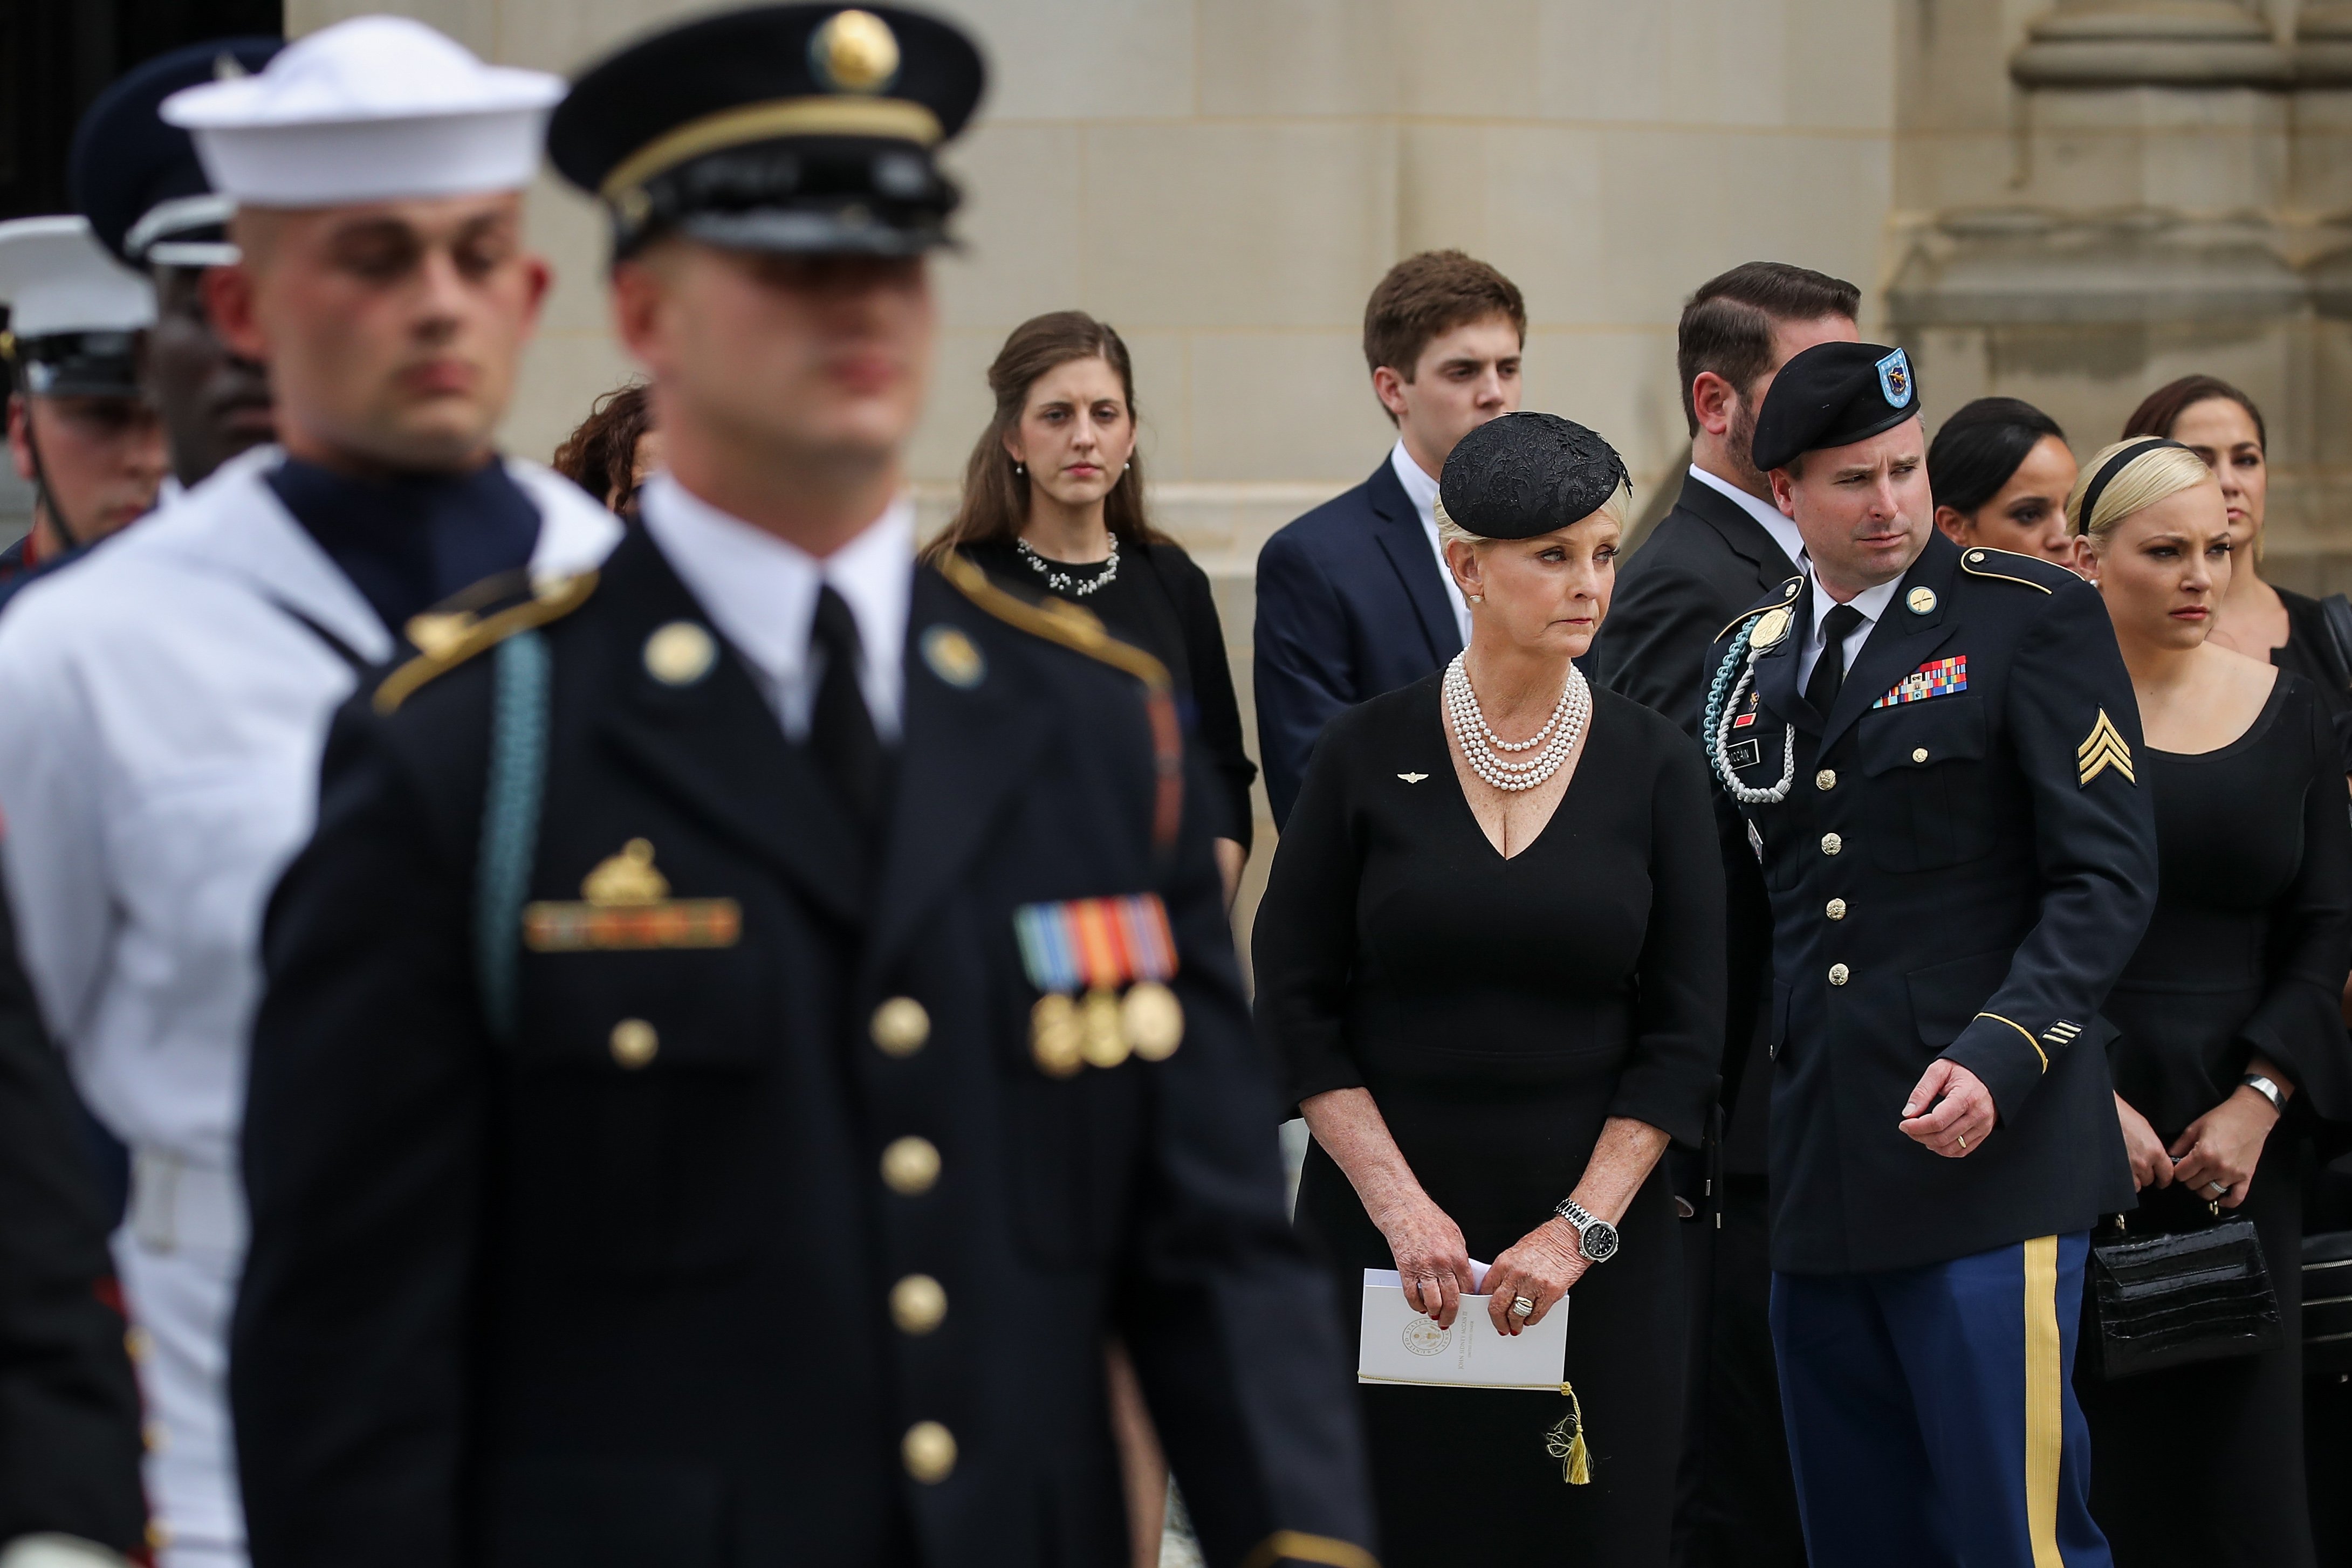 Cindy, James, and Meghan McCain look on as the casket of the late Senator John McCain is loaded into a Hearse at the Washington National Cathedral, September 1, 2018 in Washington, DC | Photo: Getty Images